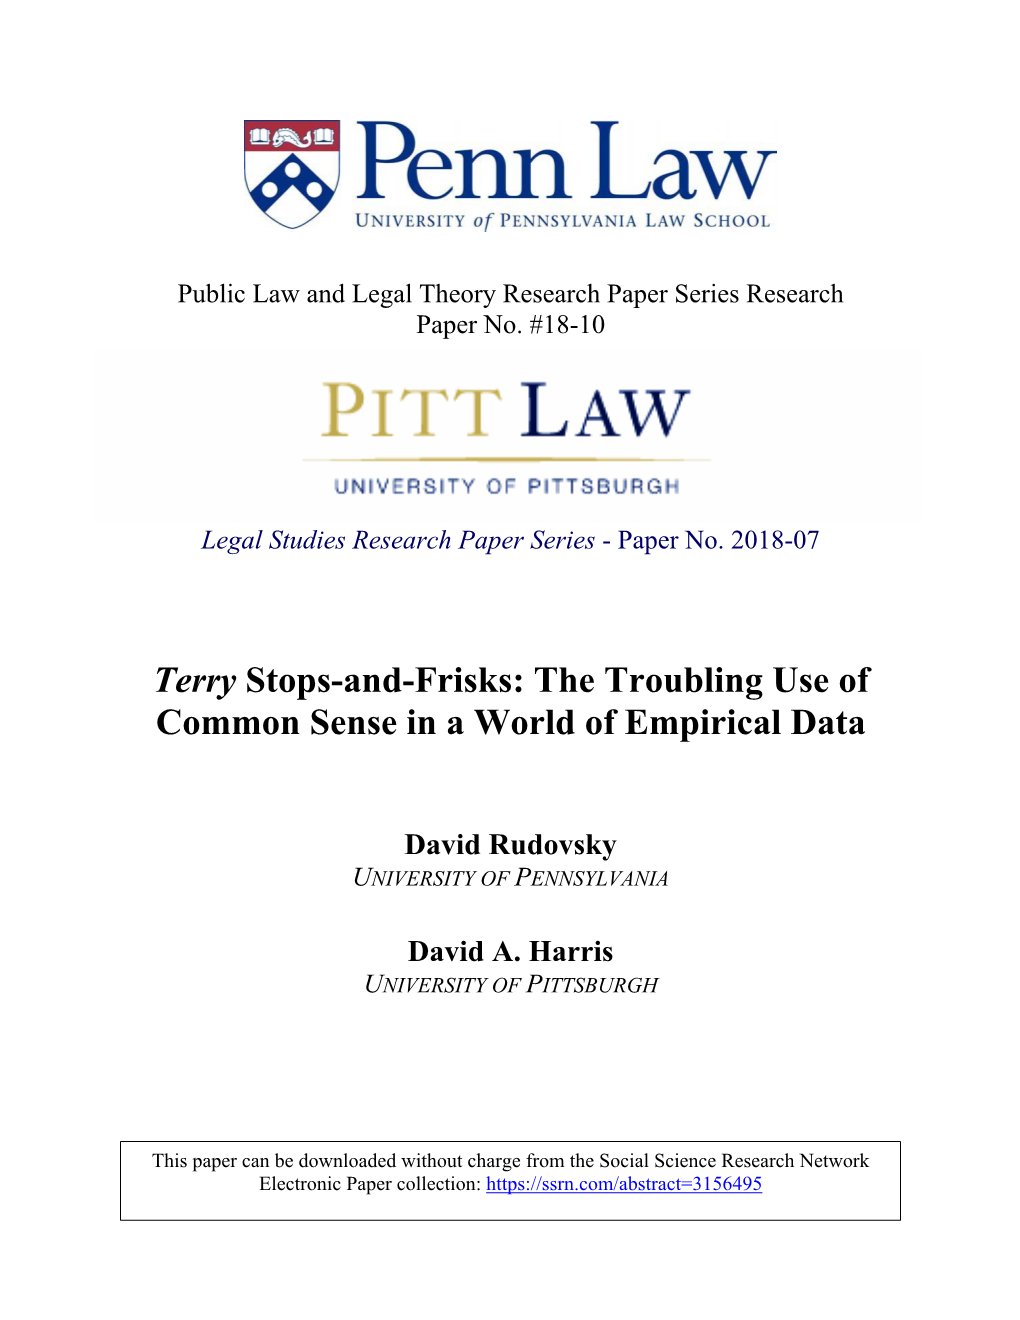 Terry Stops-And-Frisks: the Troubling Use of Common Sense in a World of Empirical Data